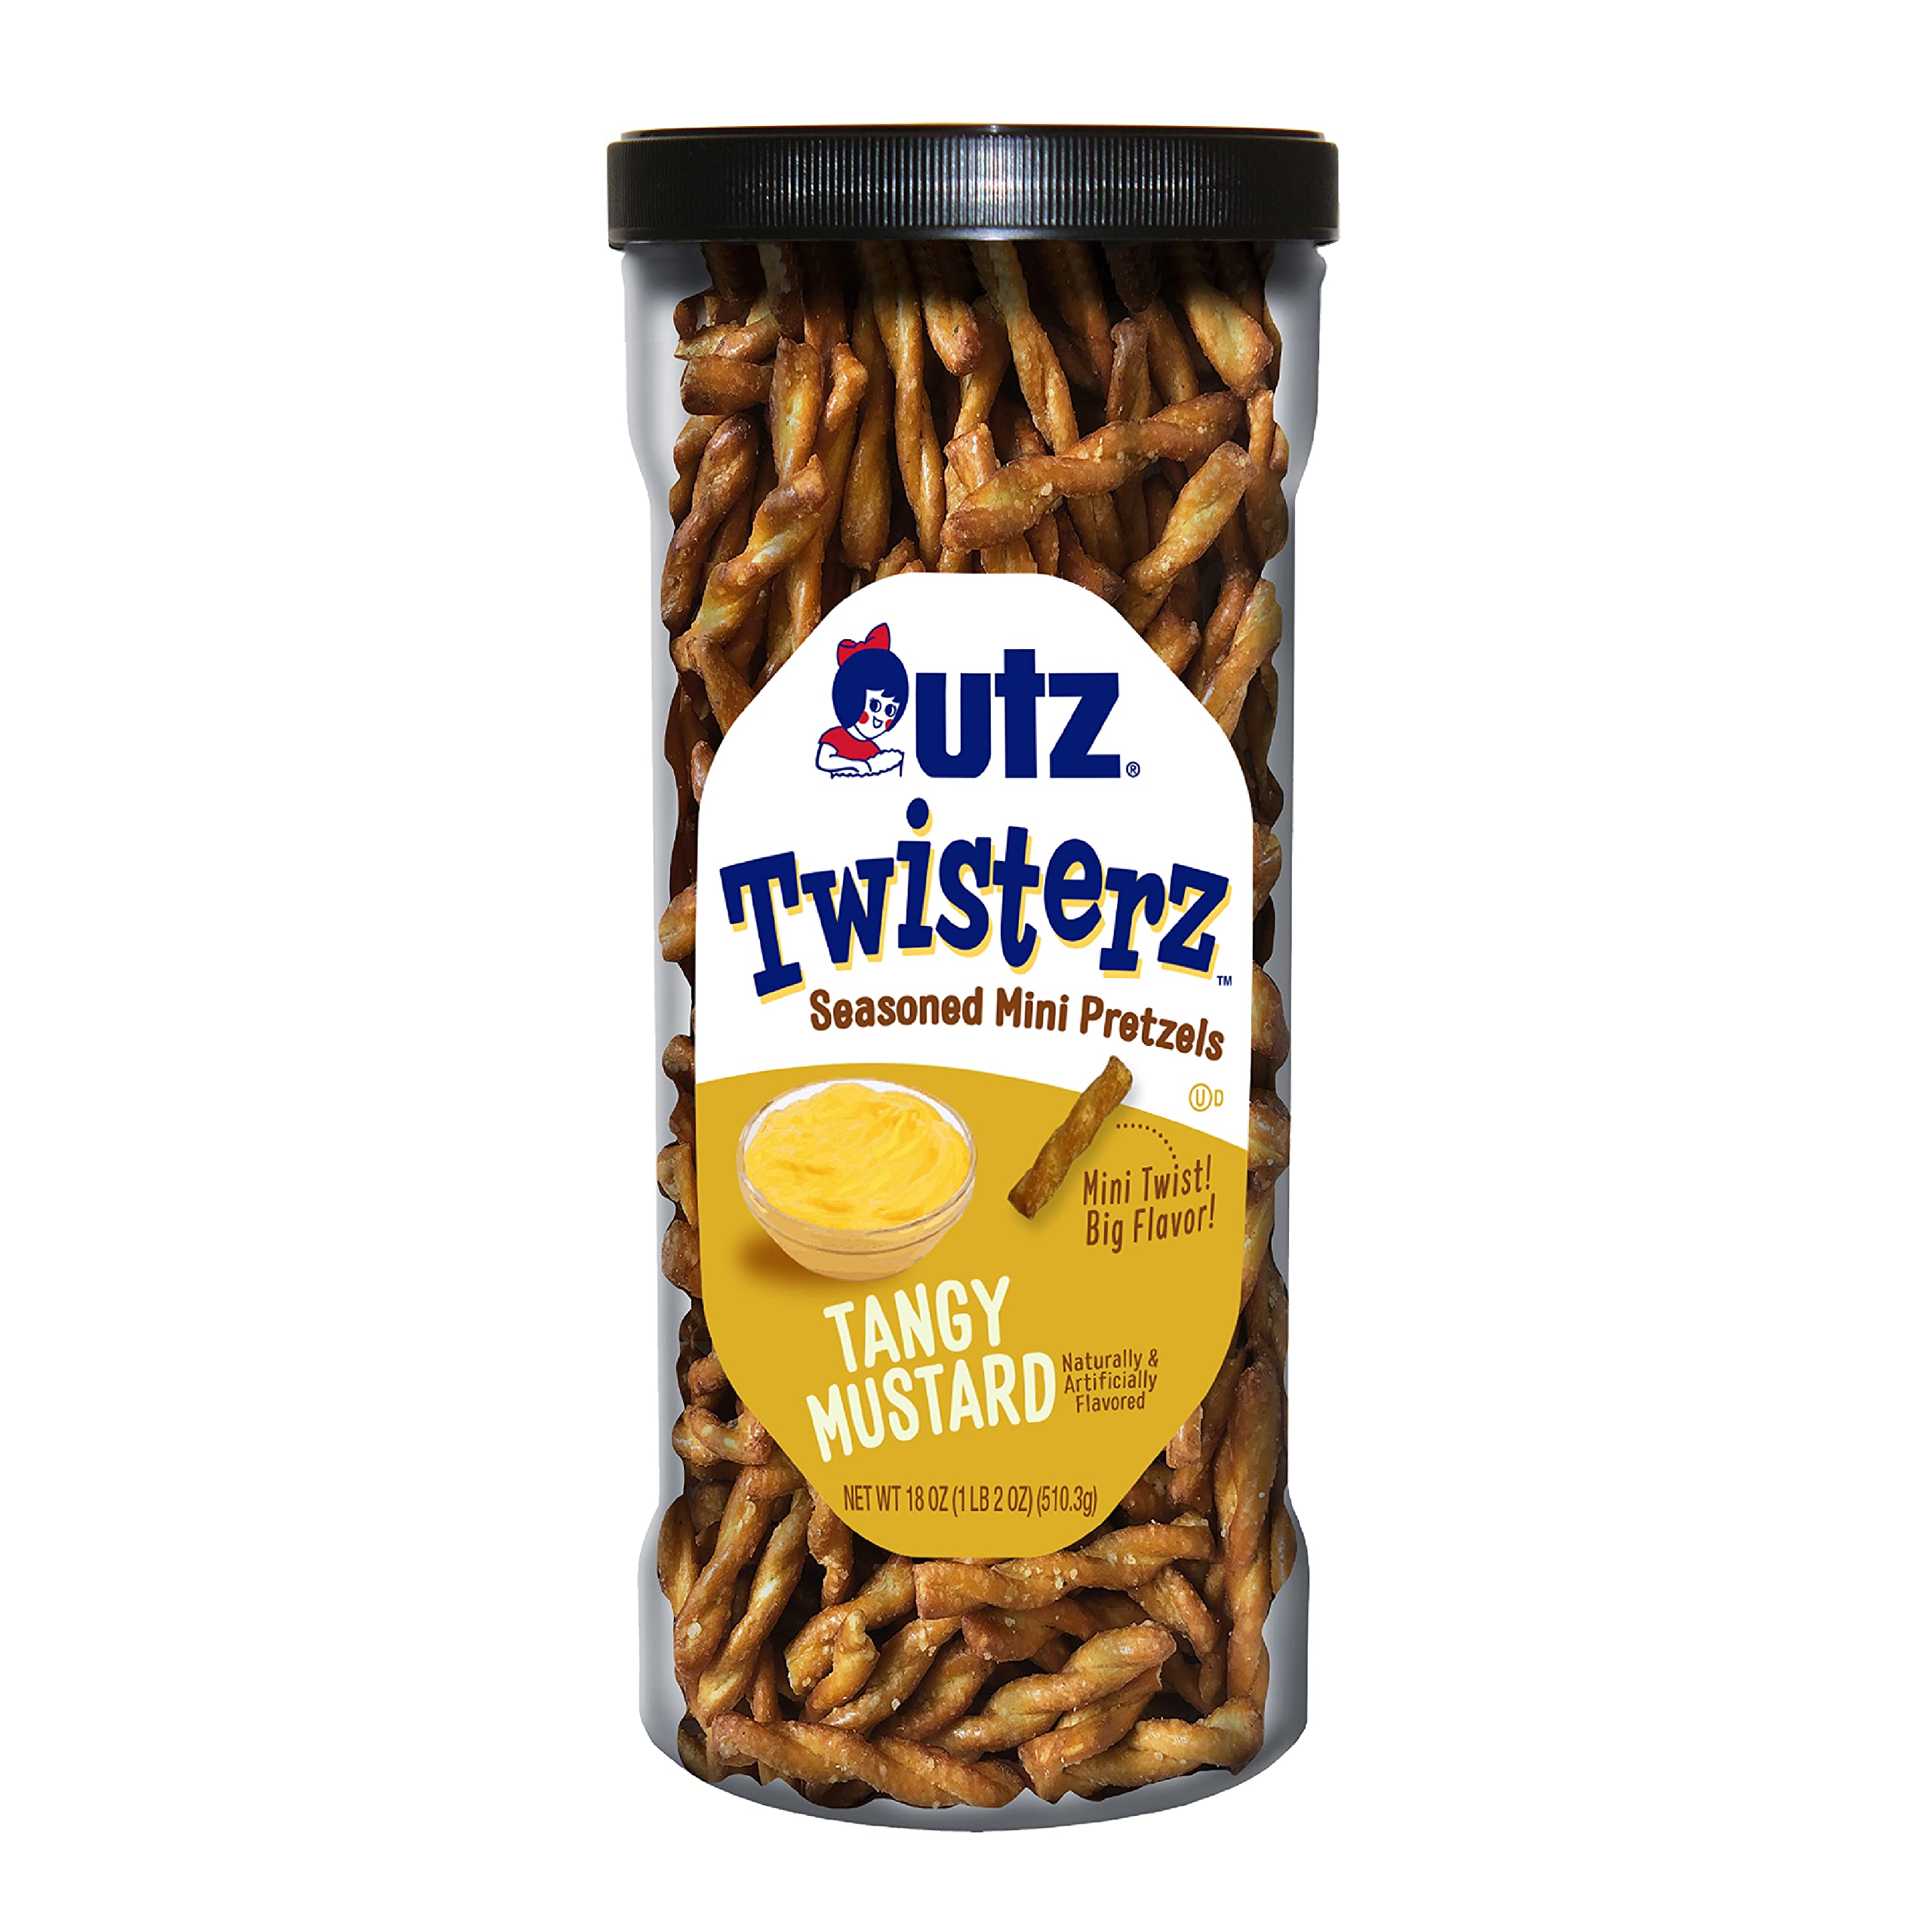 Utz Twisterz Seasoned Mini Flavored Tangy Mustard Crunchy Pretzel Twists, Perfect for Dipping and Snacks, Zero Cholesterol Snack Food, 21 Oz~$6.99 @ Amazon~Free Prime Shipping!